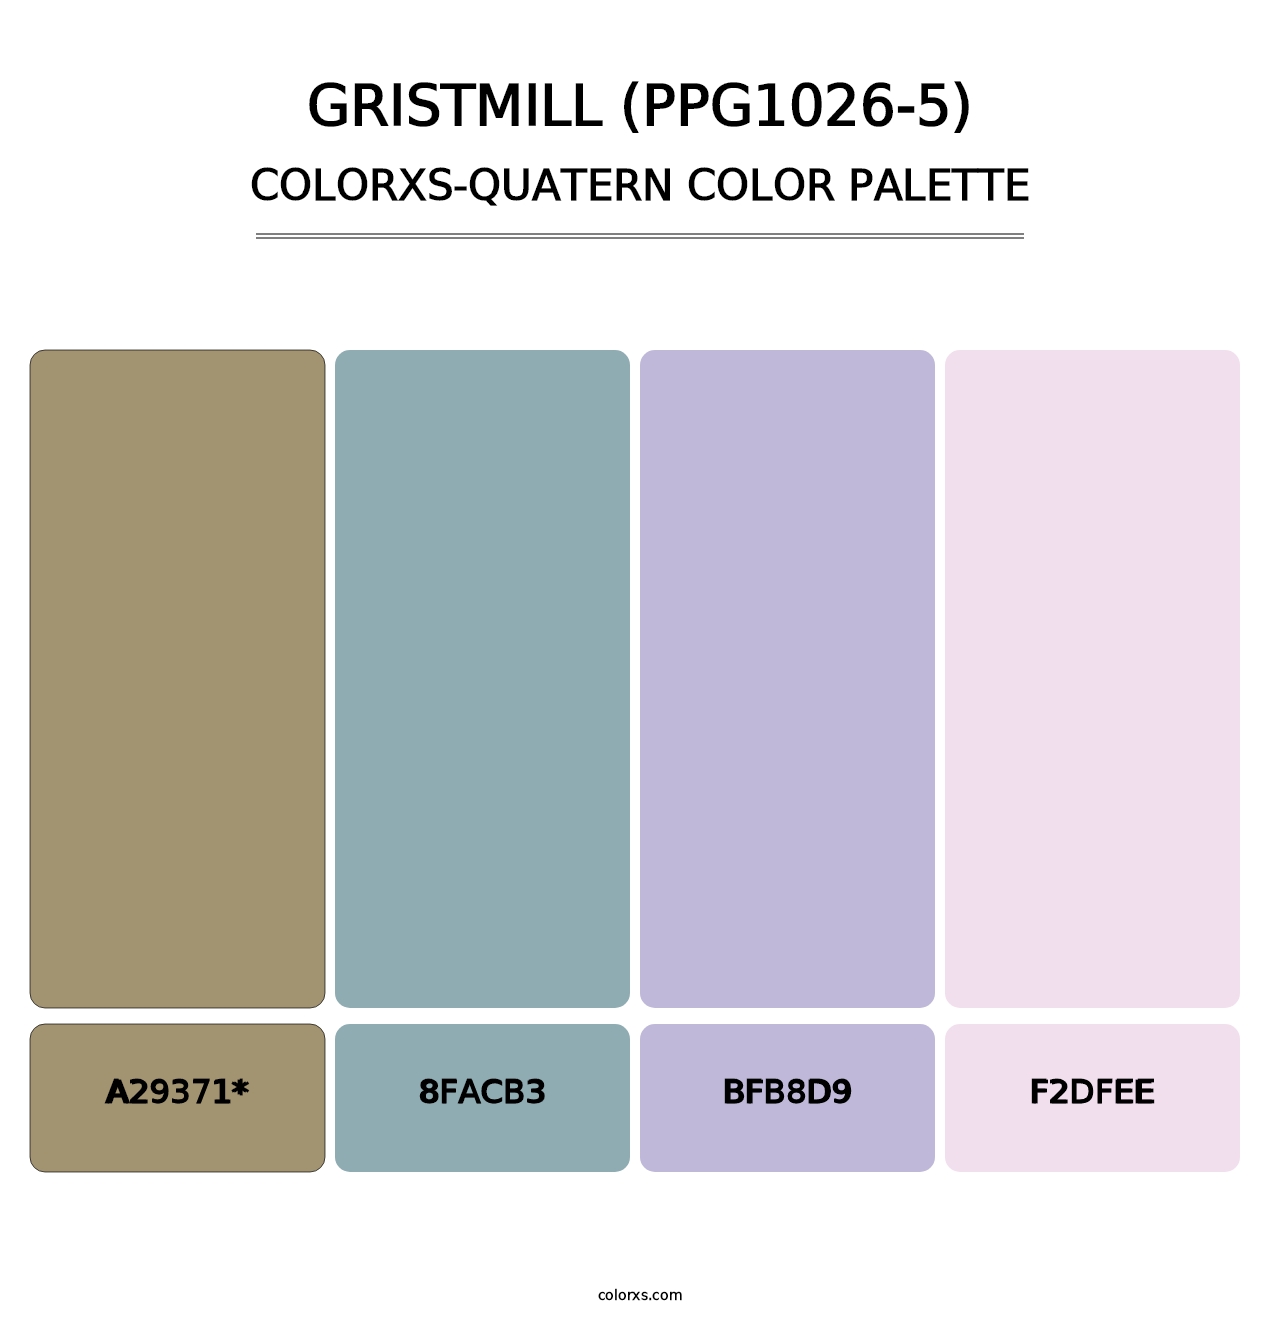 Gristmill (PPG1026-5) - Colorxs Quatern Palette